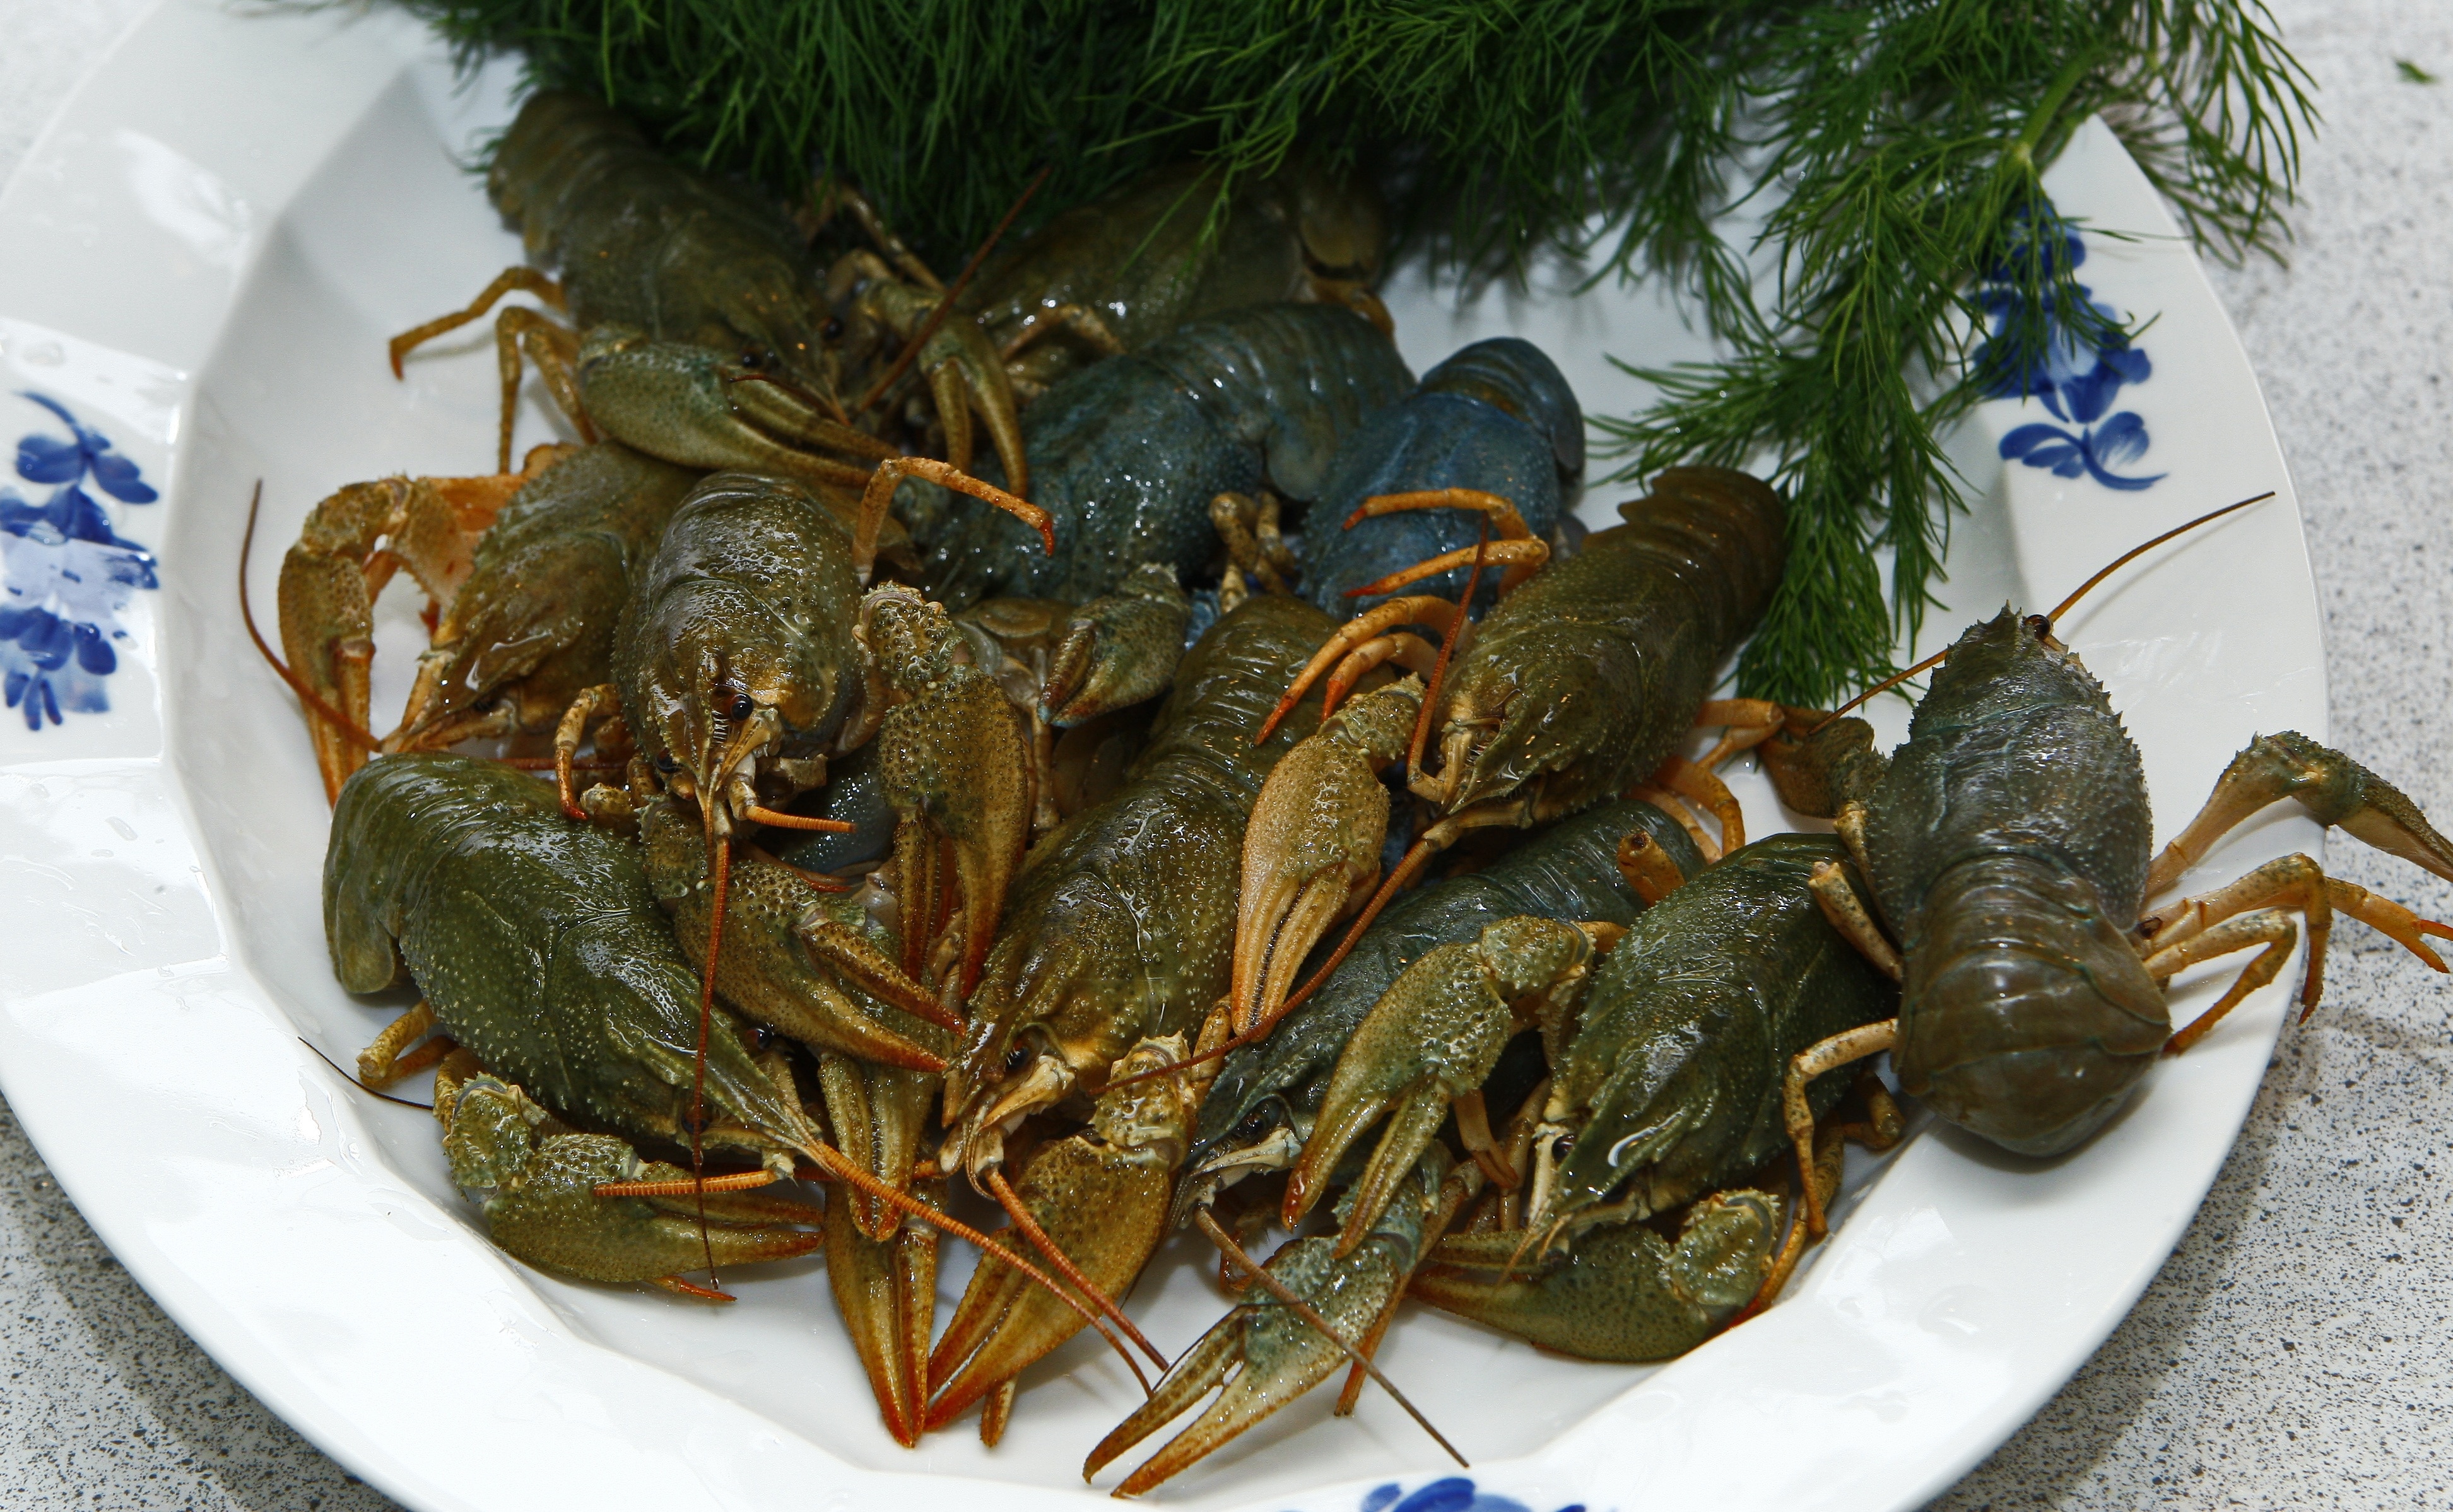 Live, Seafood, Dill, Boil, Crayfish, seafood, food and drink